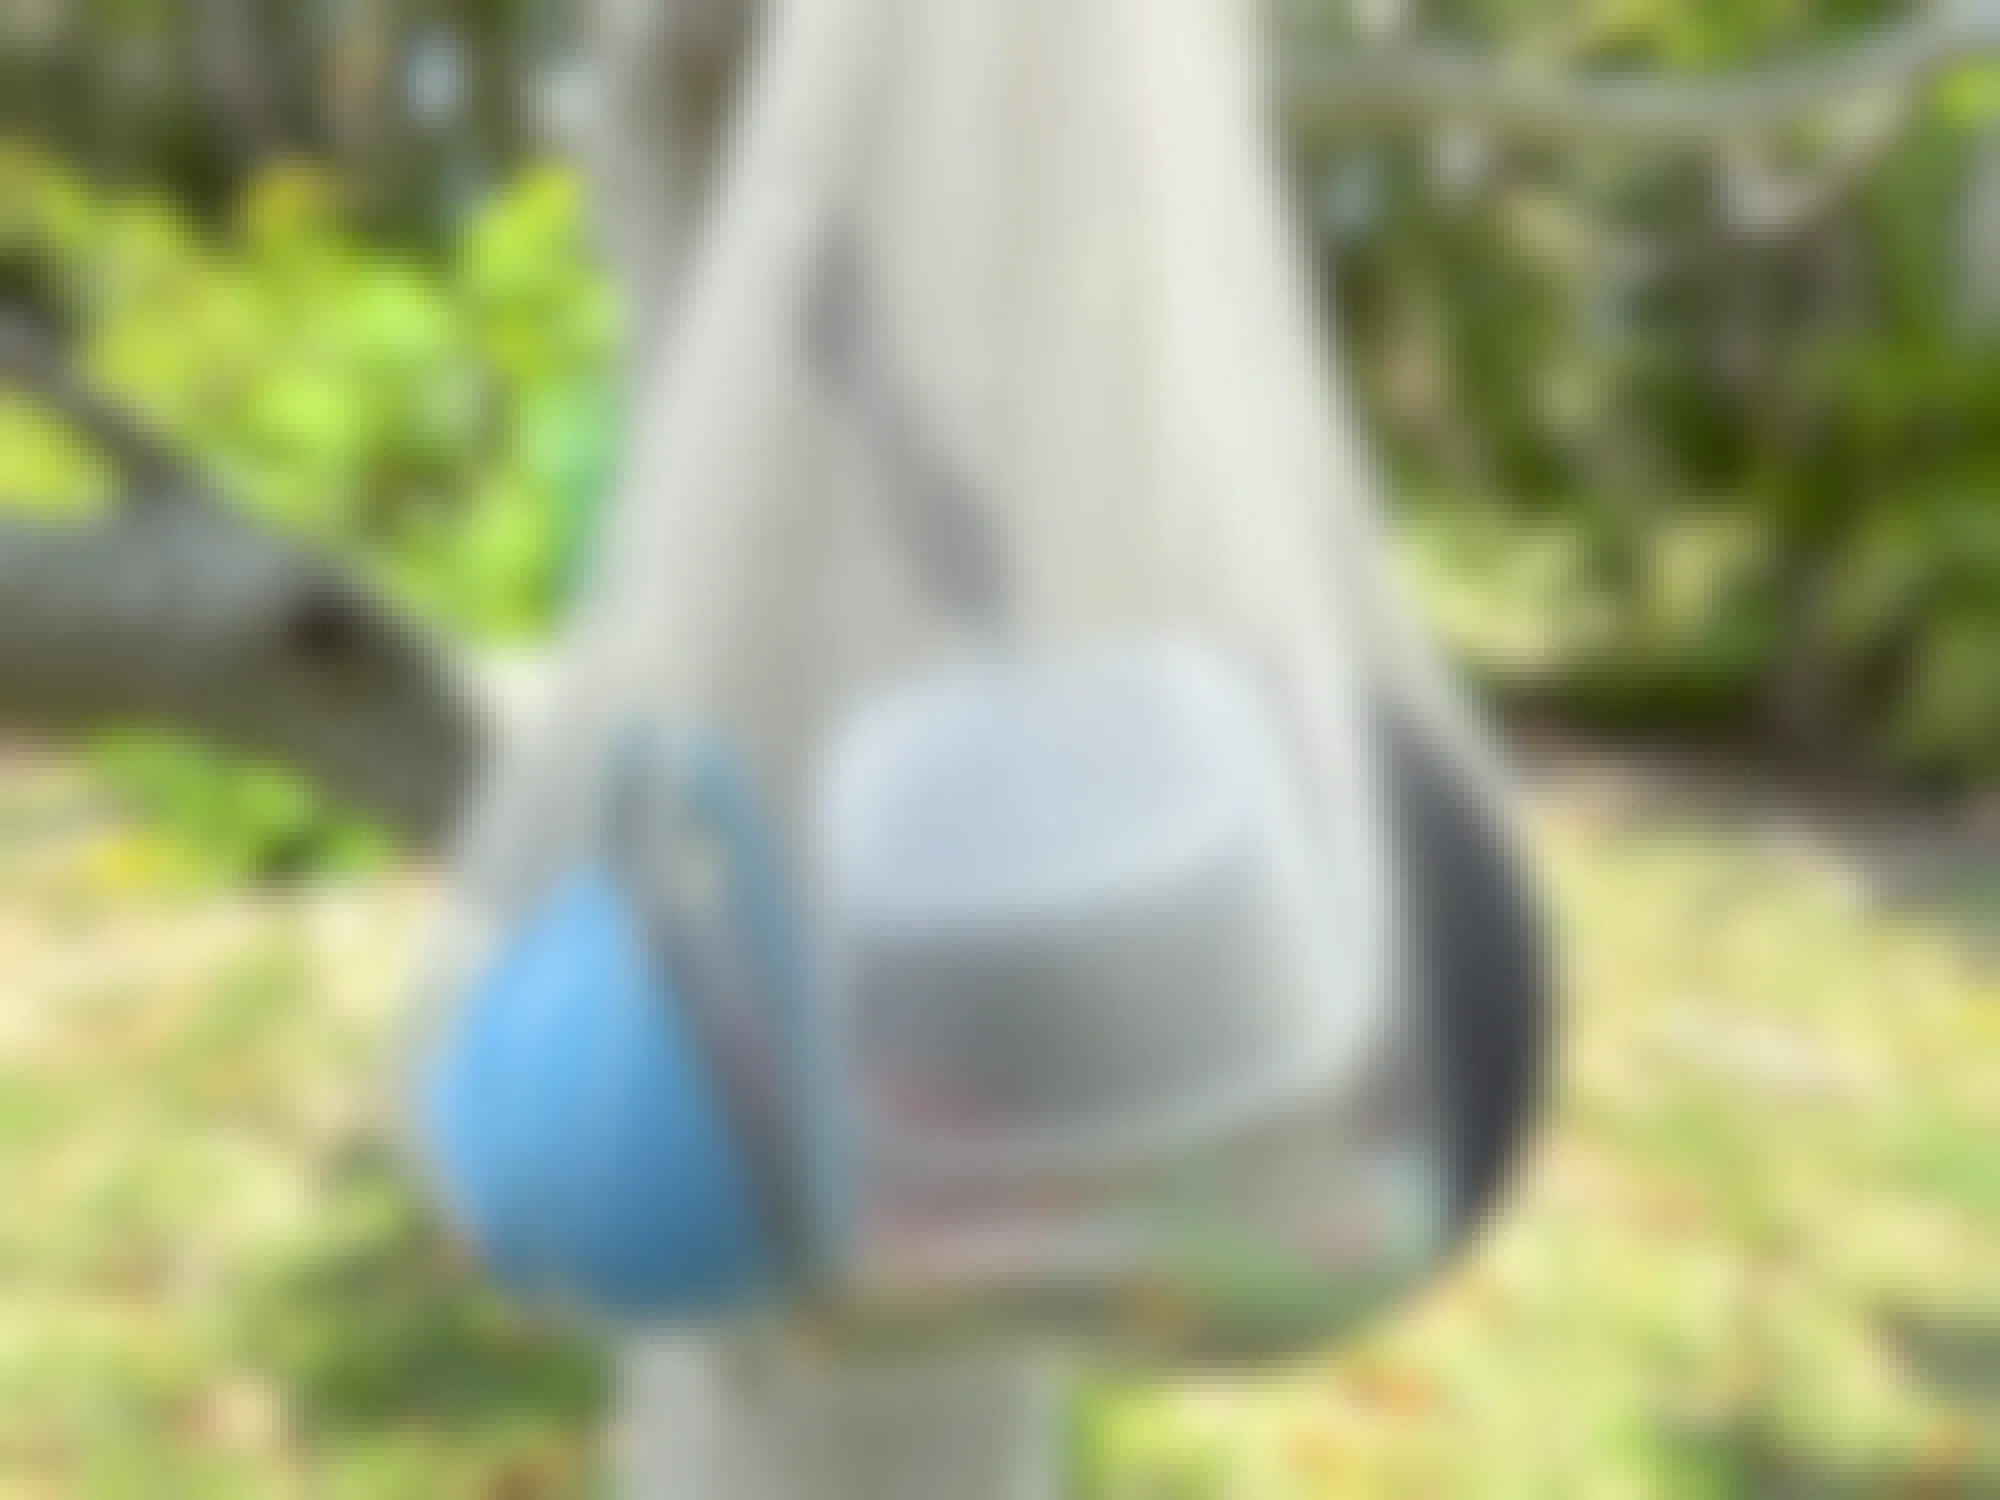 A mesh bag filled with dishes hanging in a tree to dry